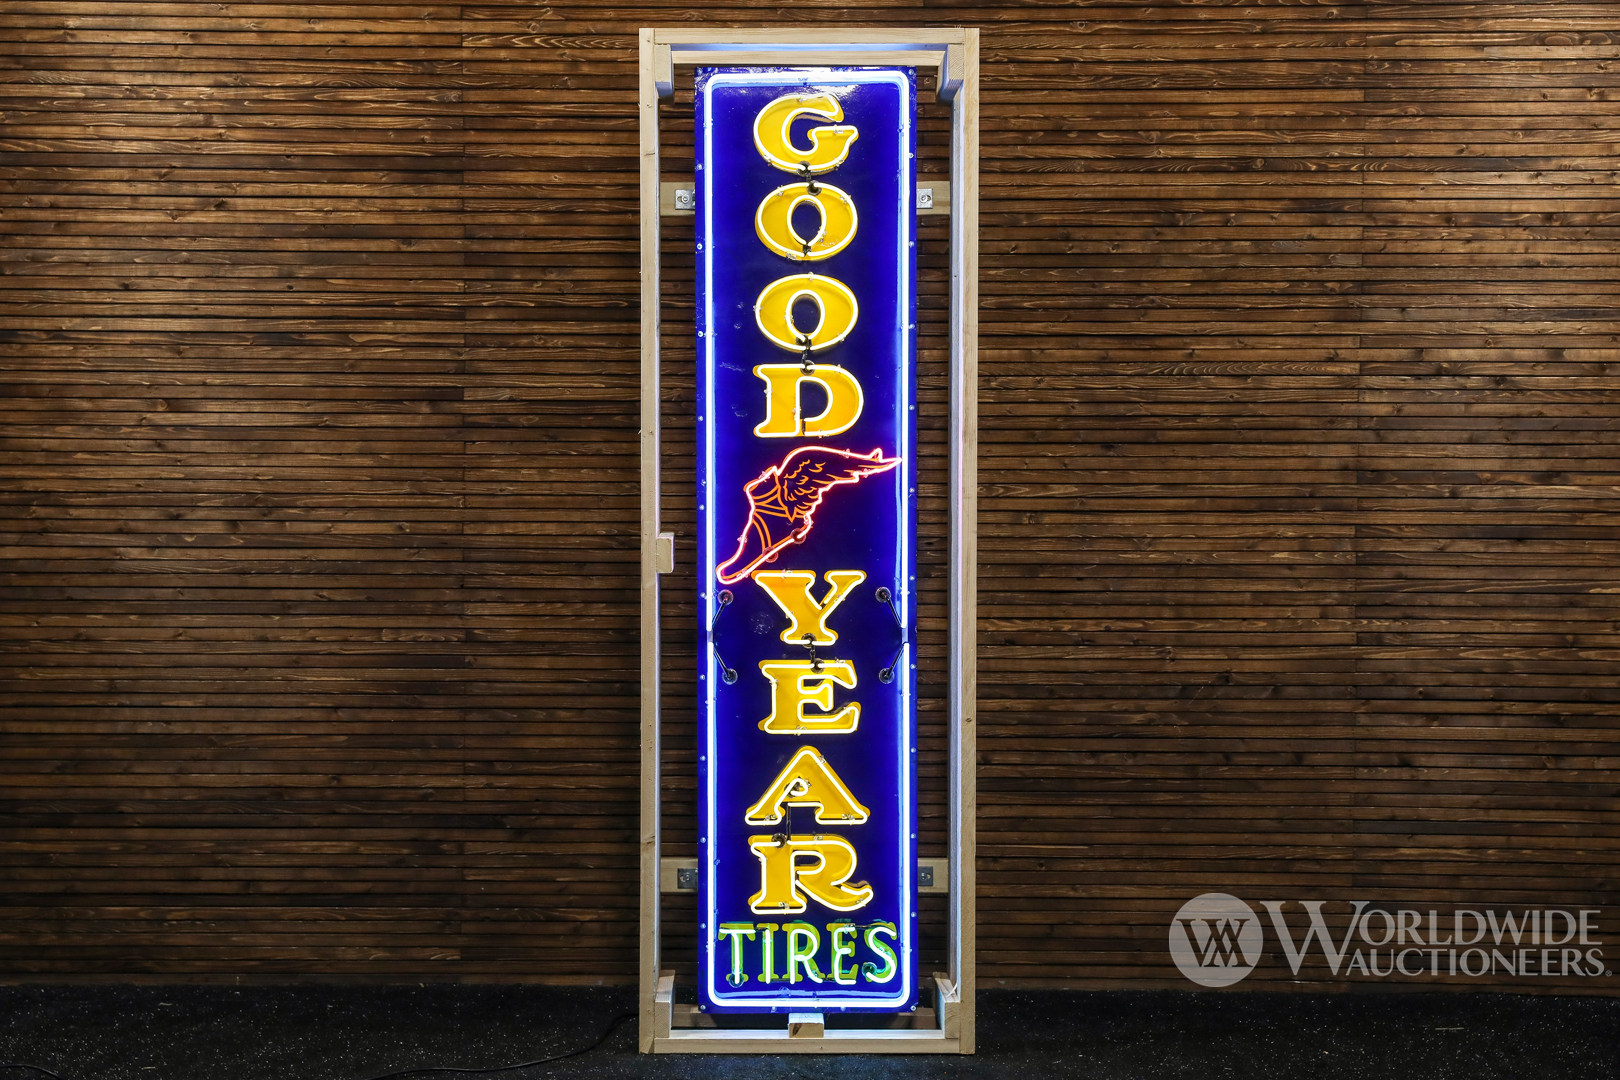 Goodyear Tires Vertical Single-Sided Porcelain Neon Sign